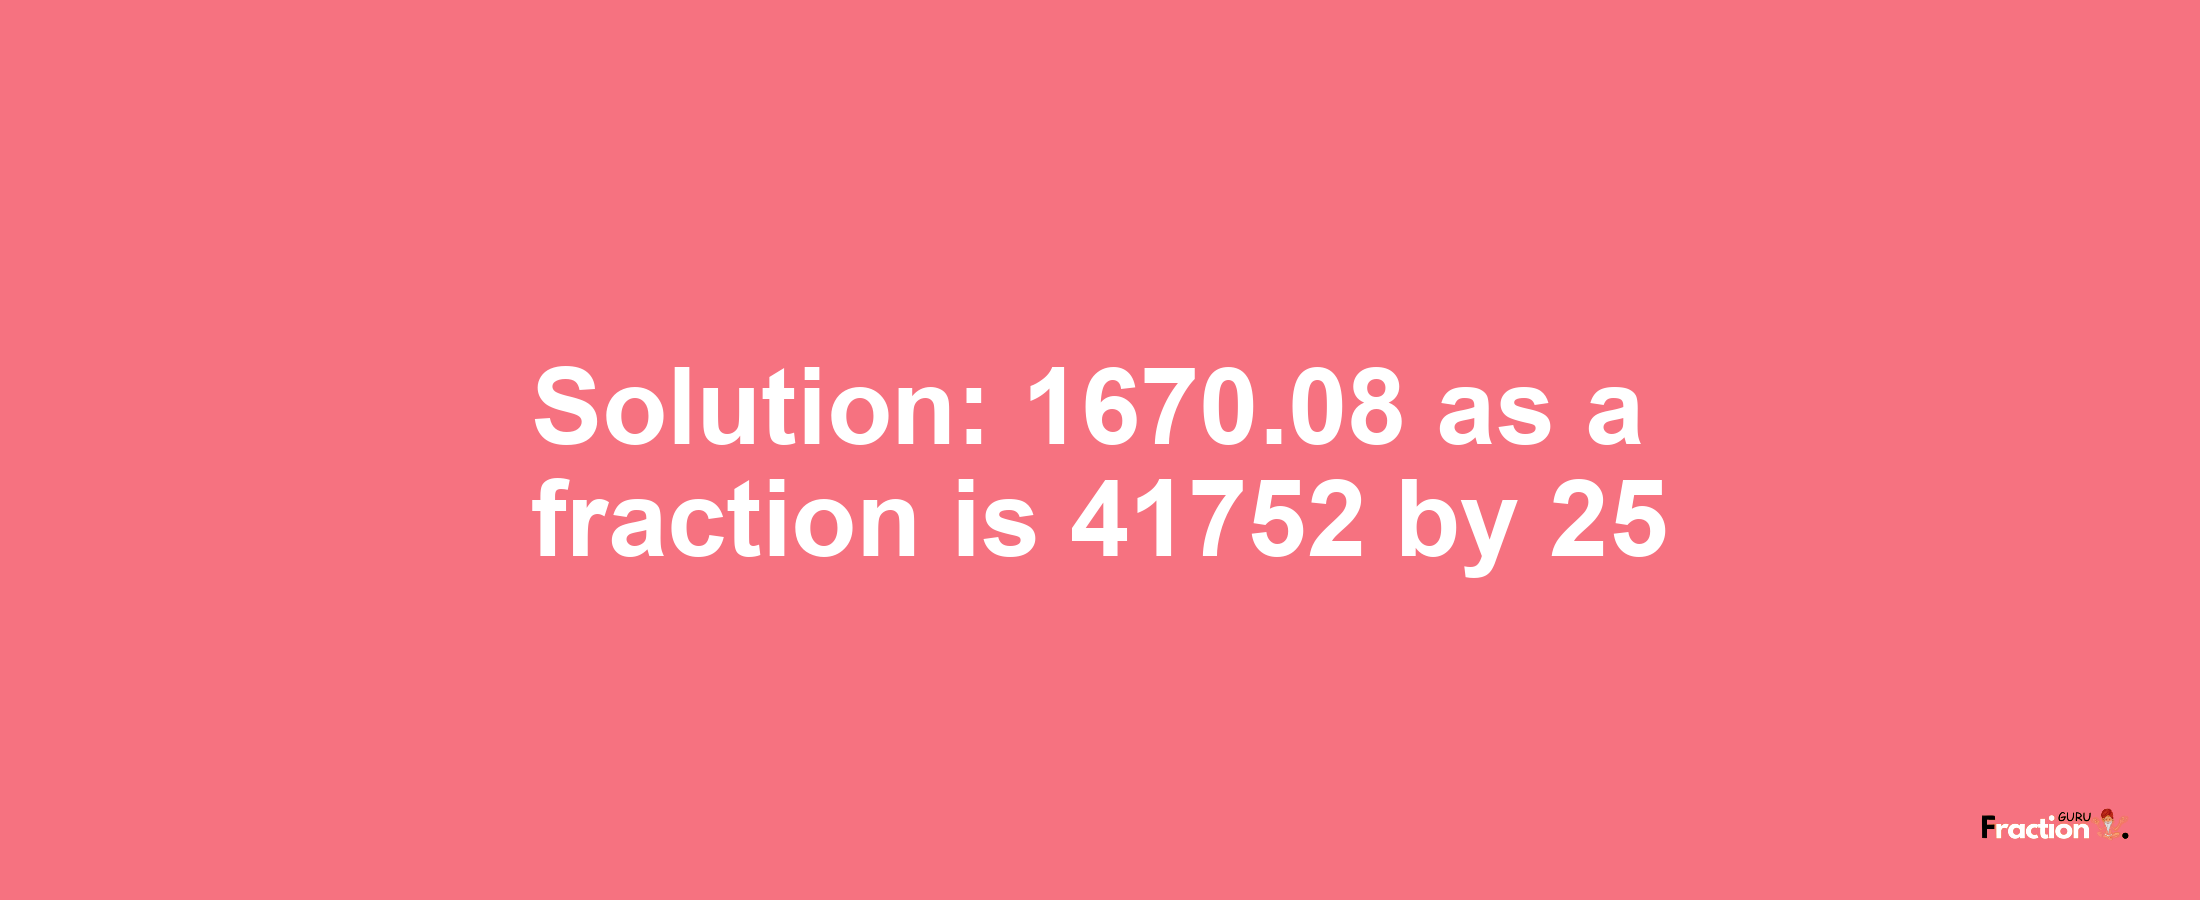 Solution:1670.08 as a fraction is 41752/25